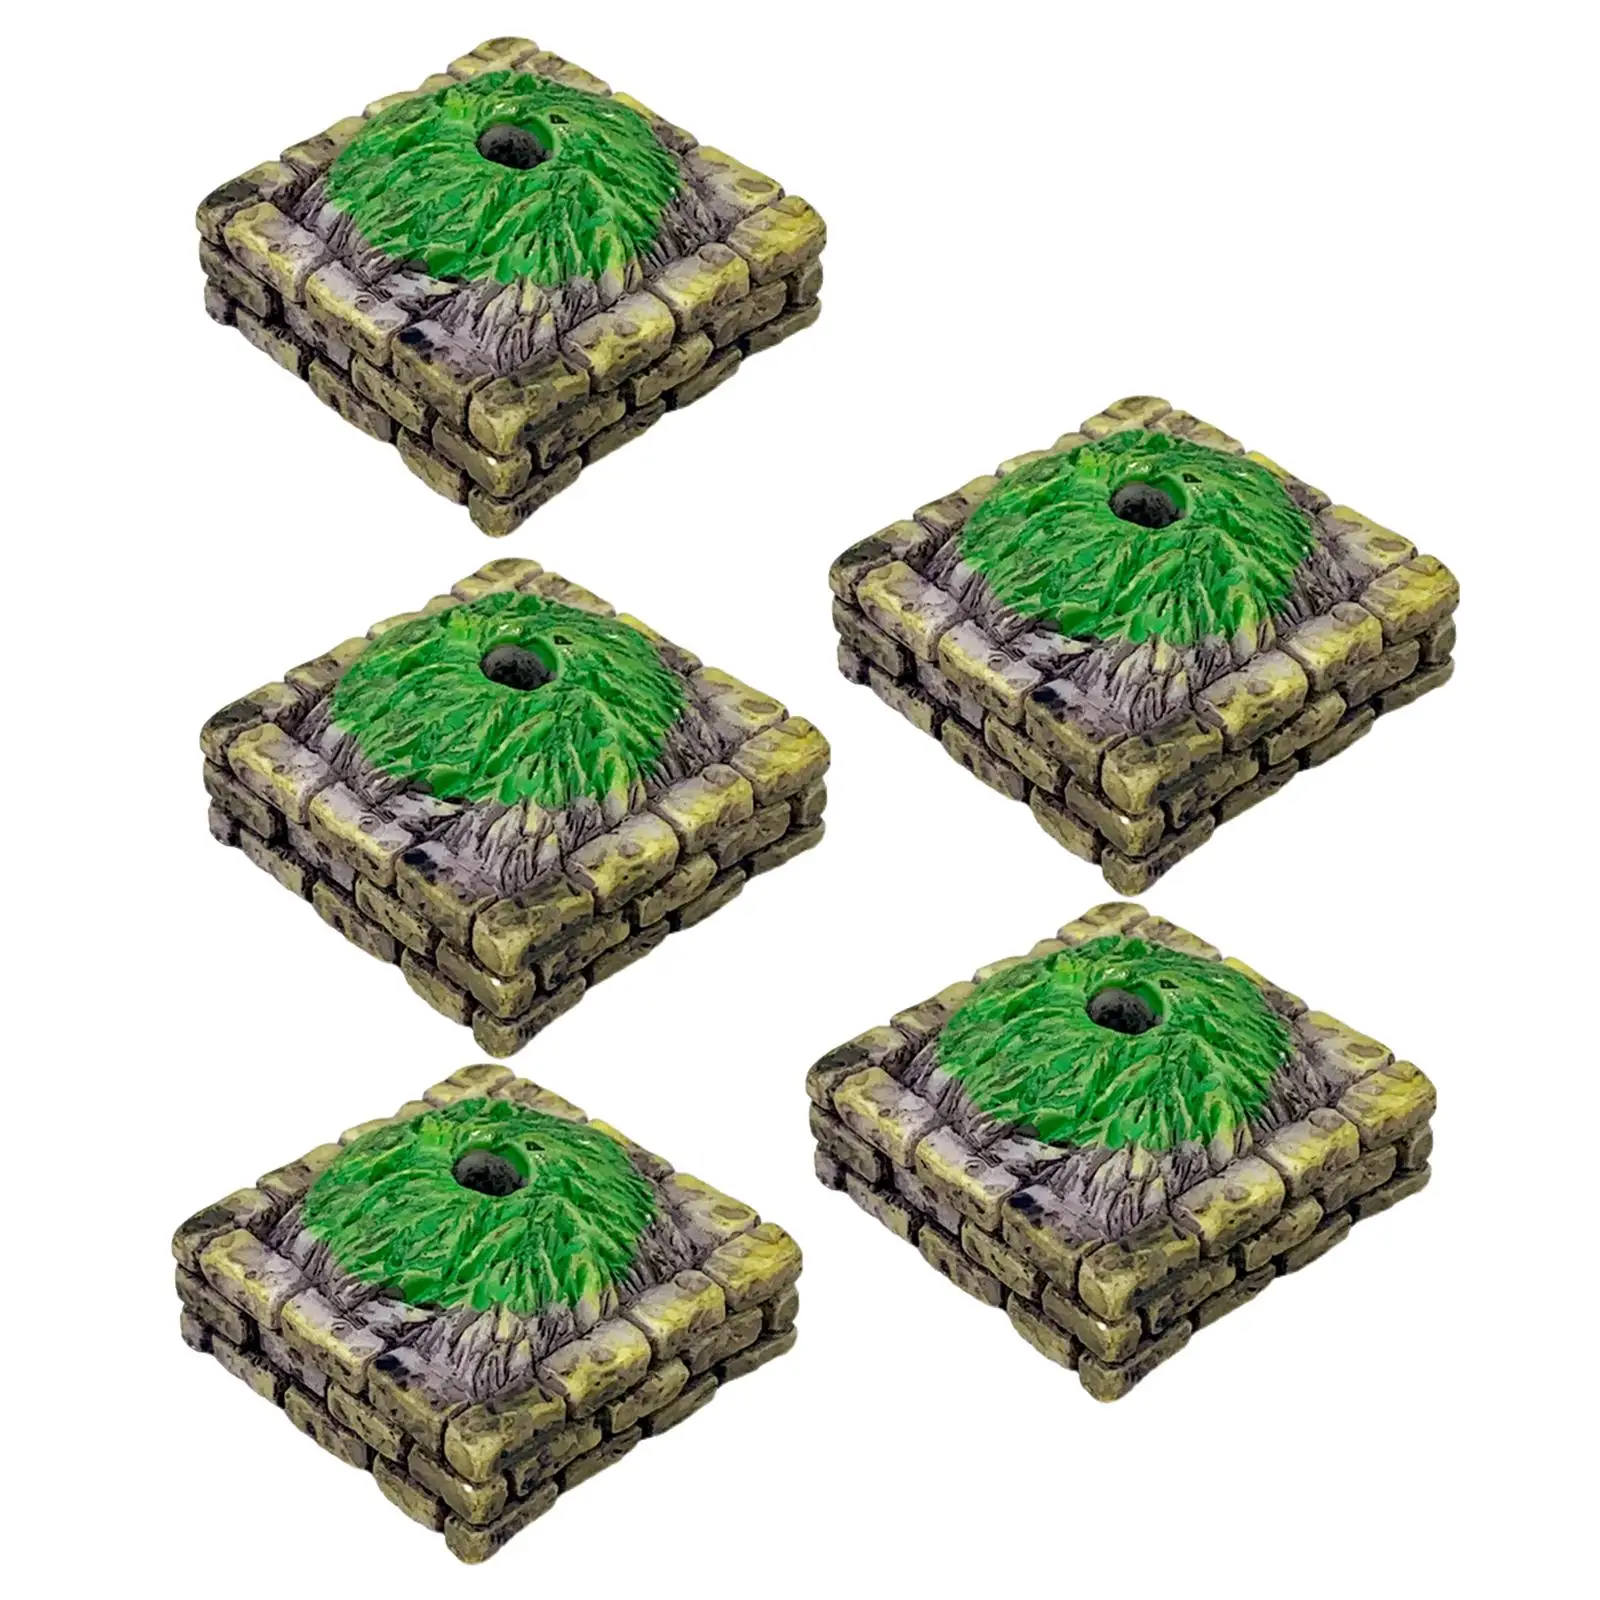 5 Pieces Flower Beds Model DIY Material Gifts for Sand Table Micro Landscape